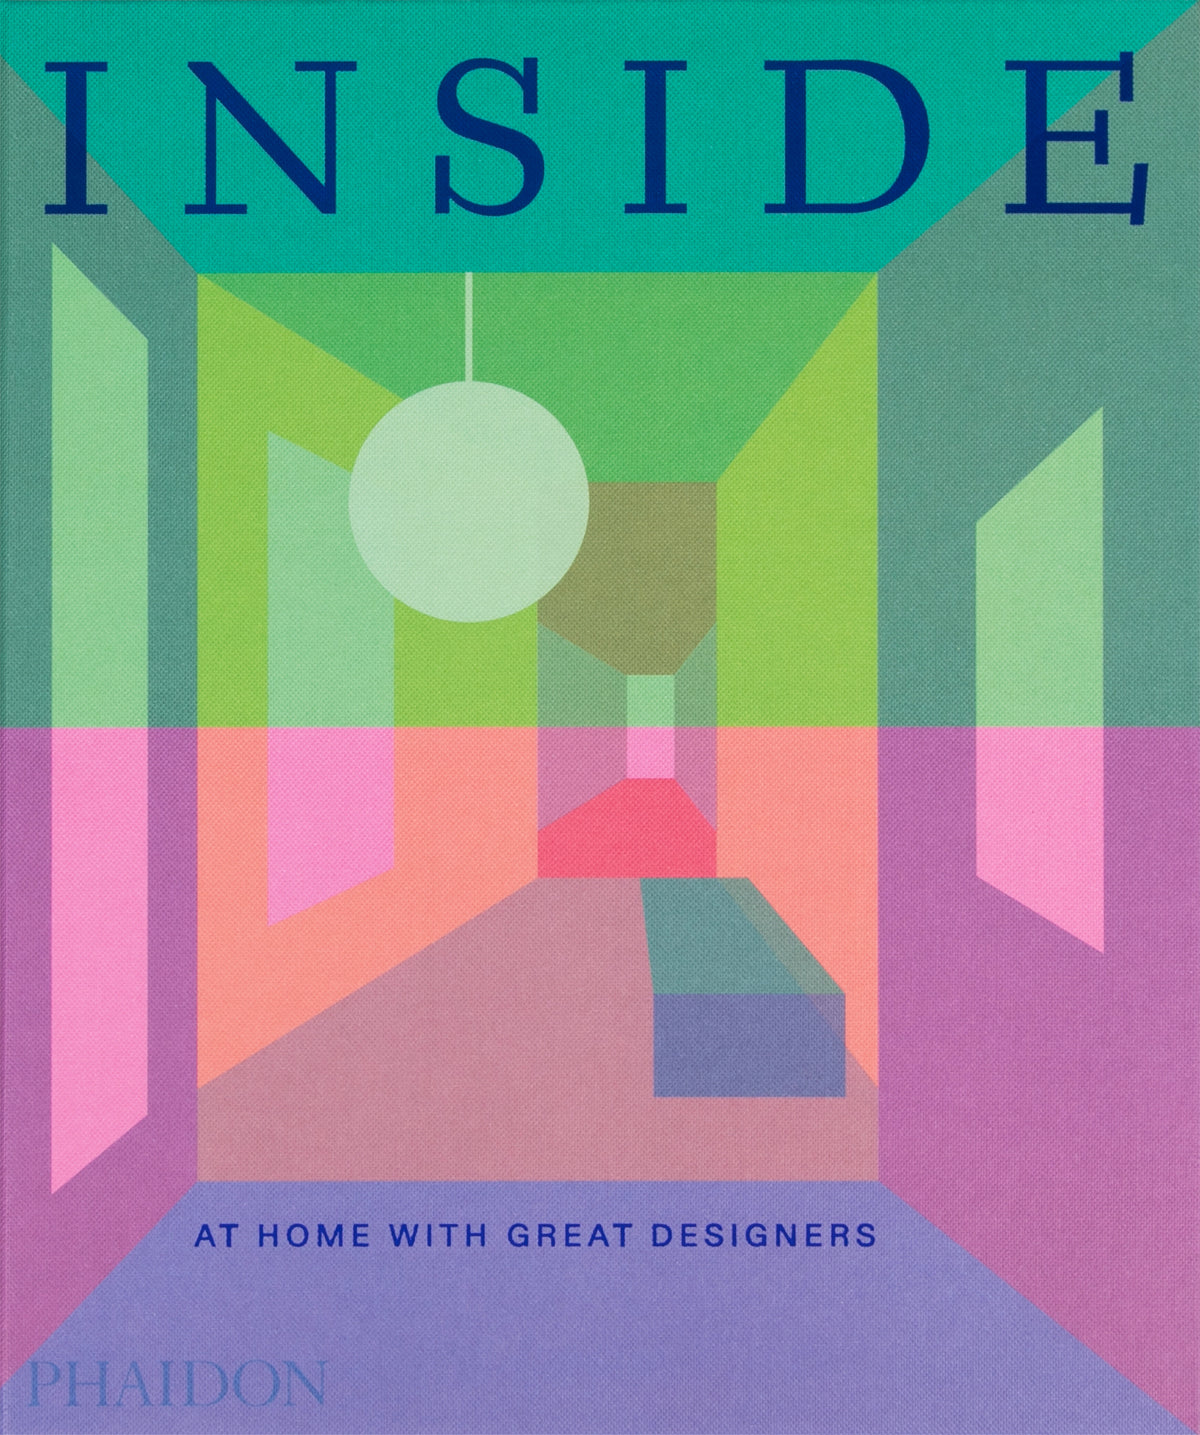 Inside At Home with Great Designers